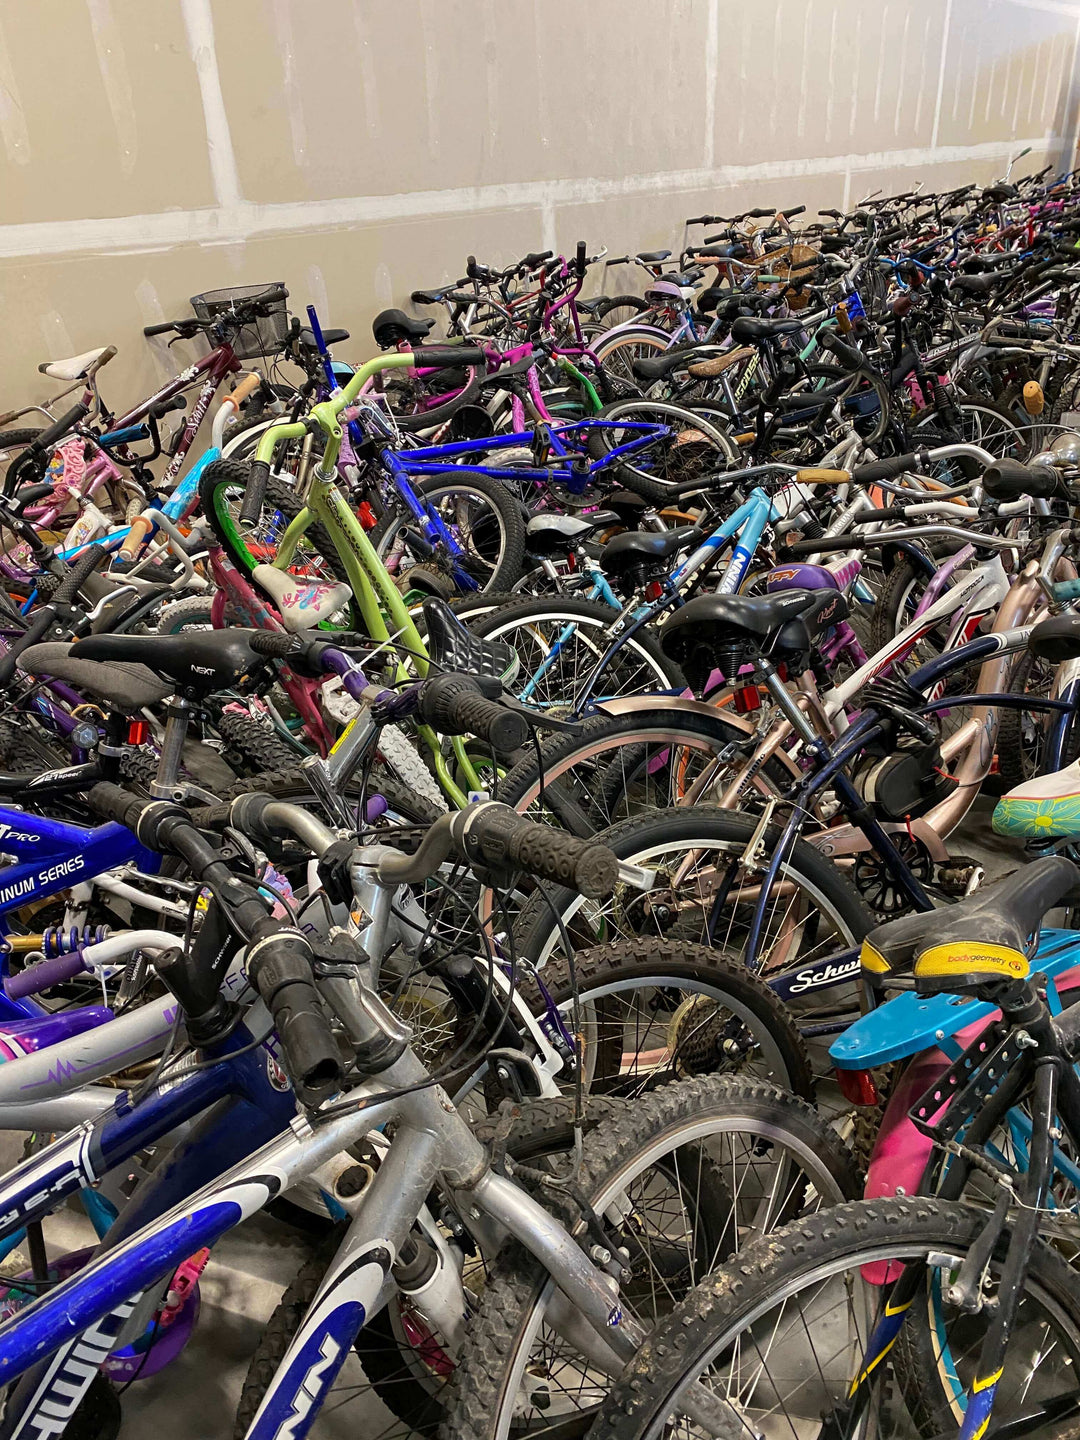 Over 200 Bikes Donated to Those in Need